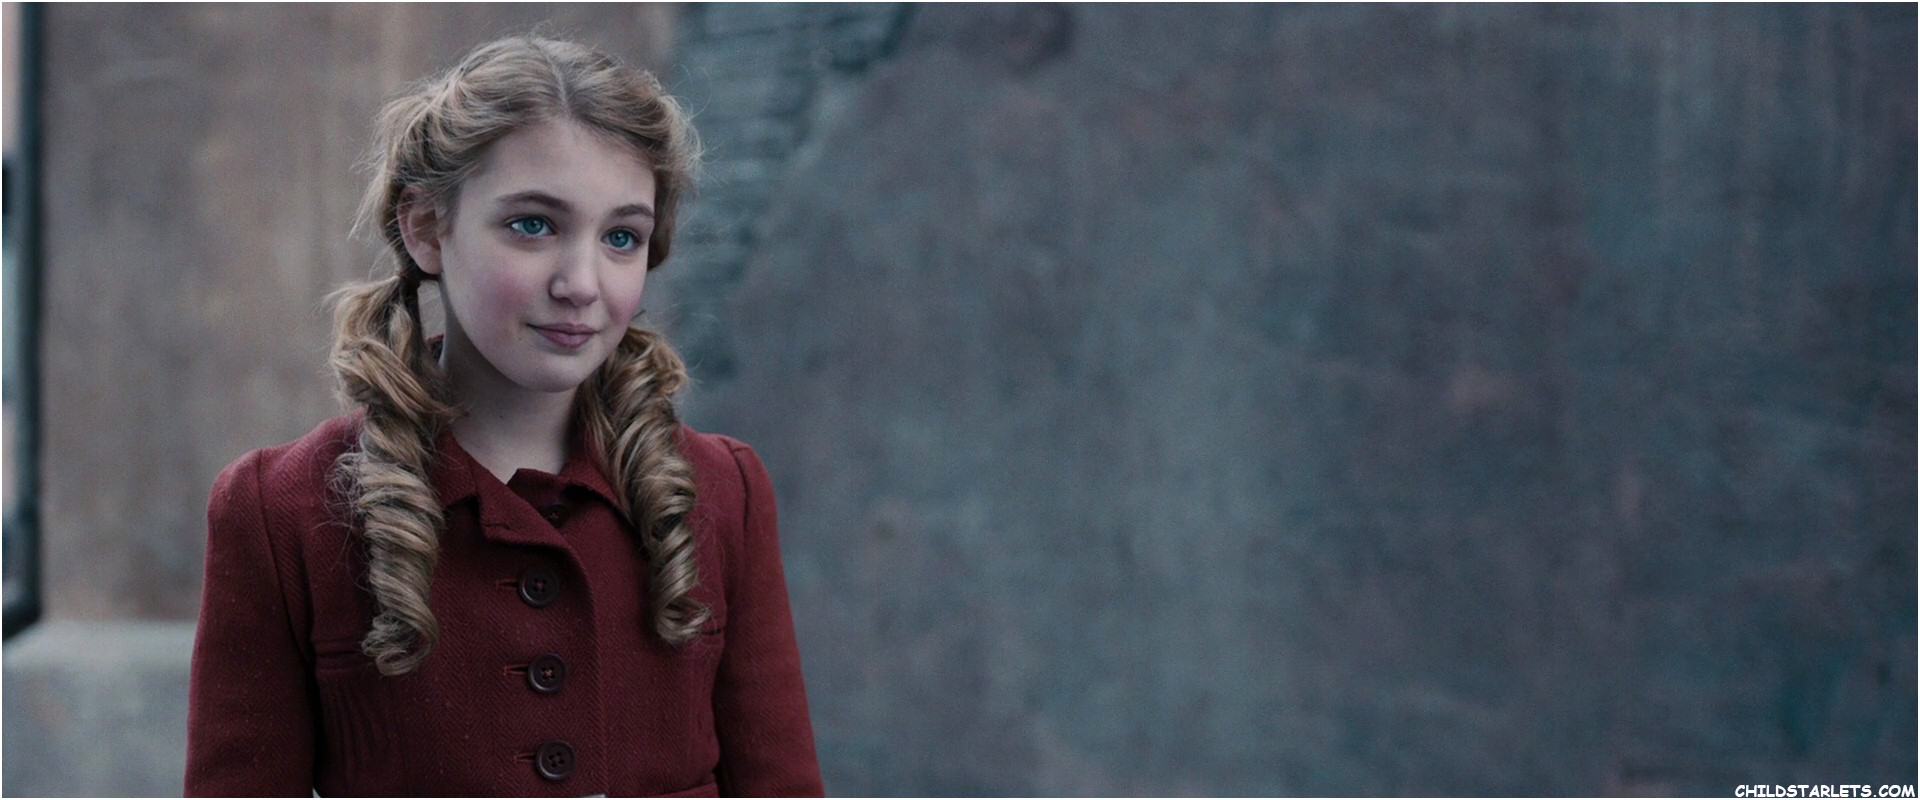 Quotes From The Book Thief Liesel. QuotesGram